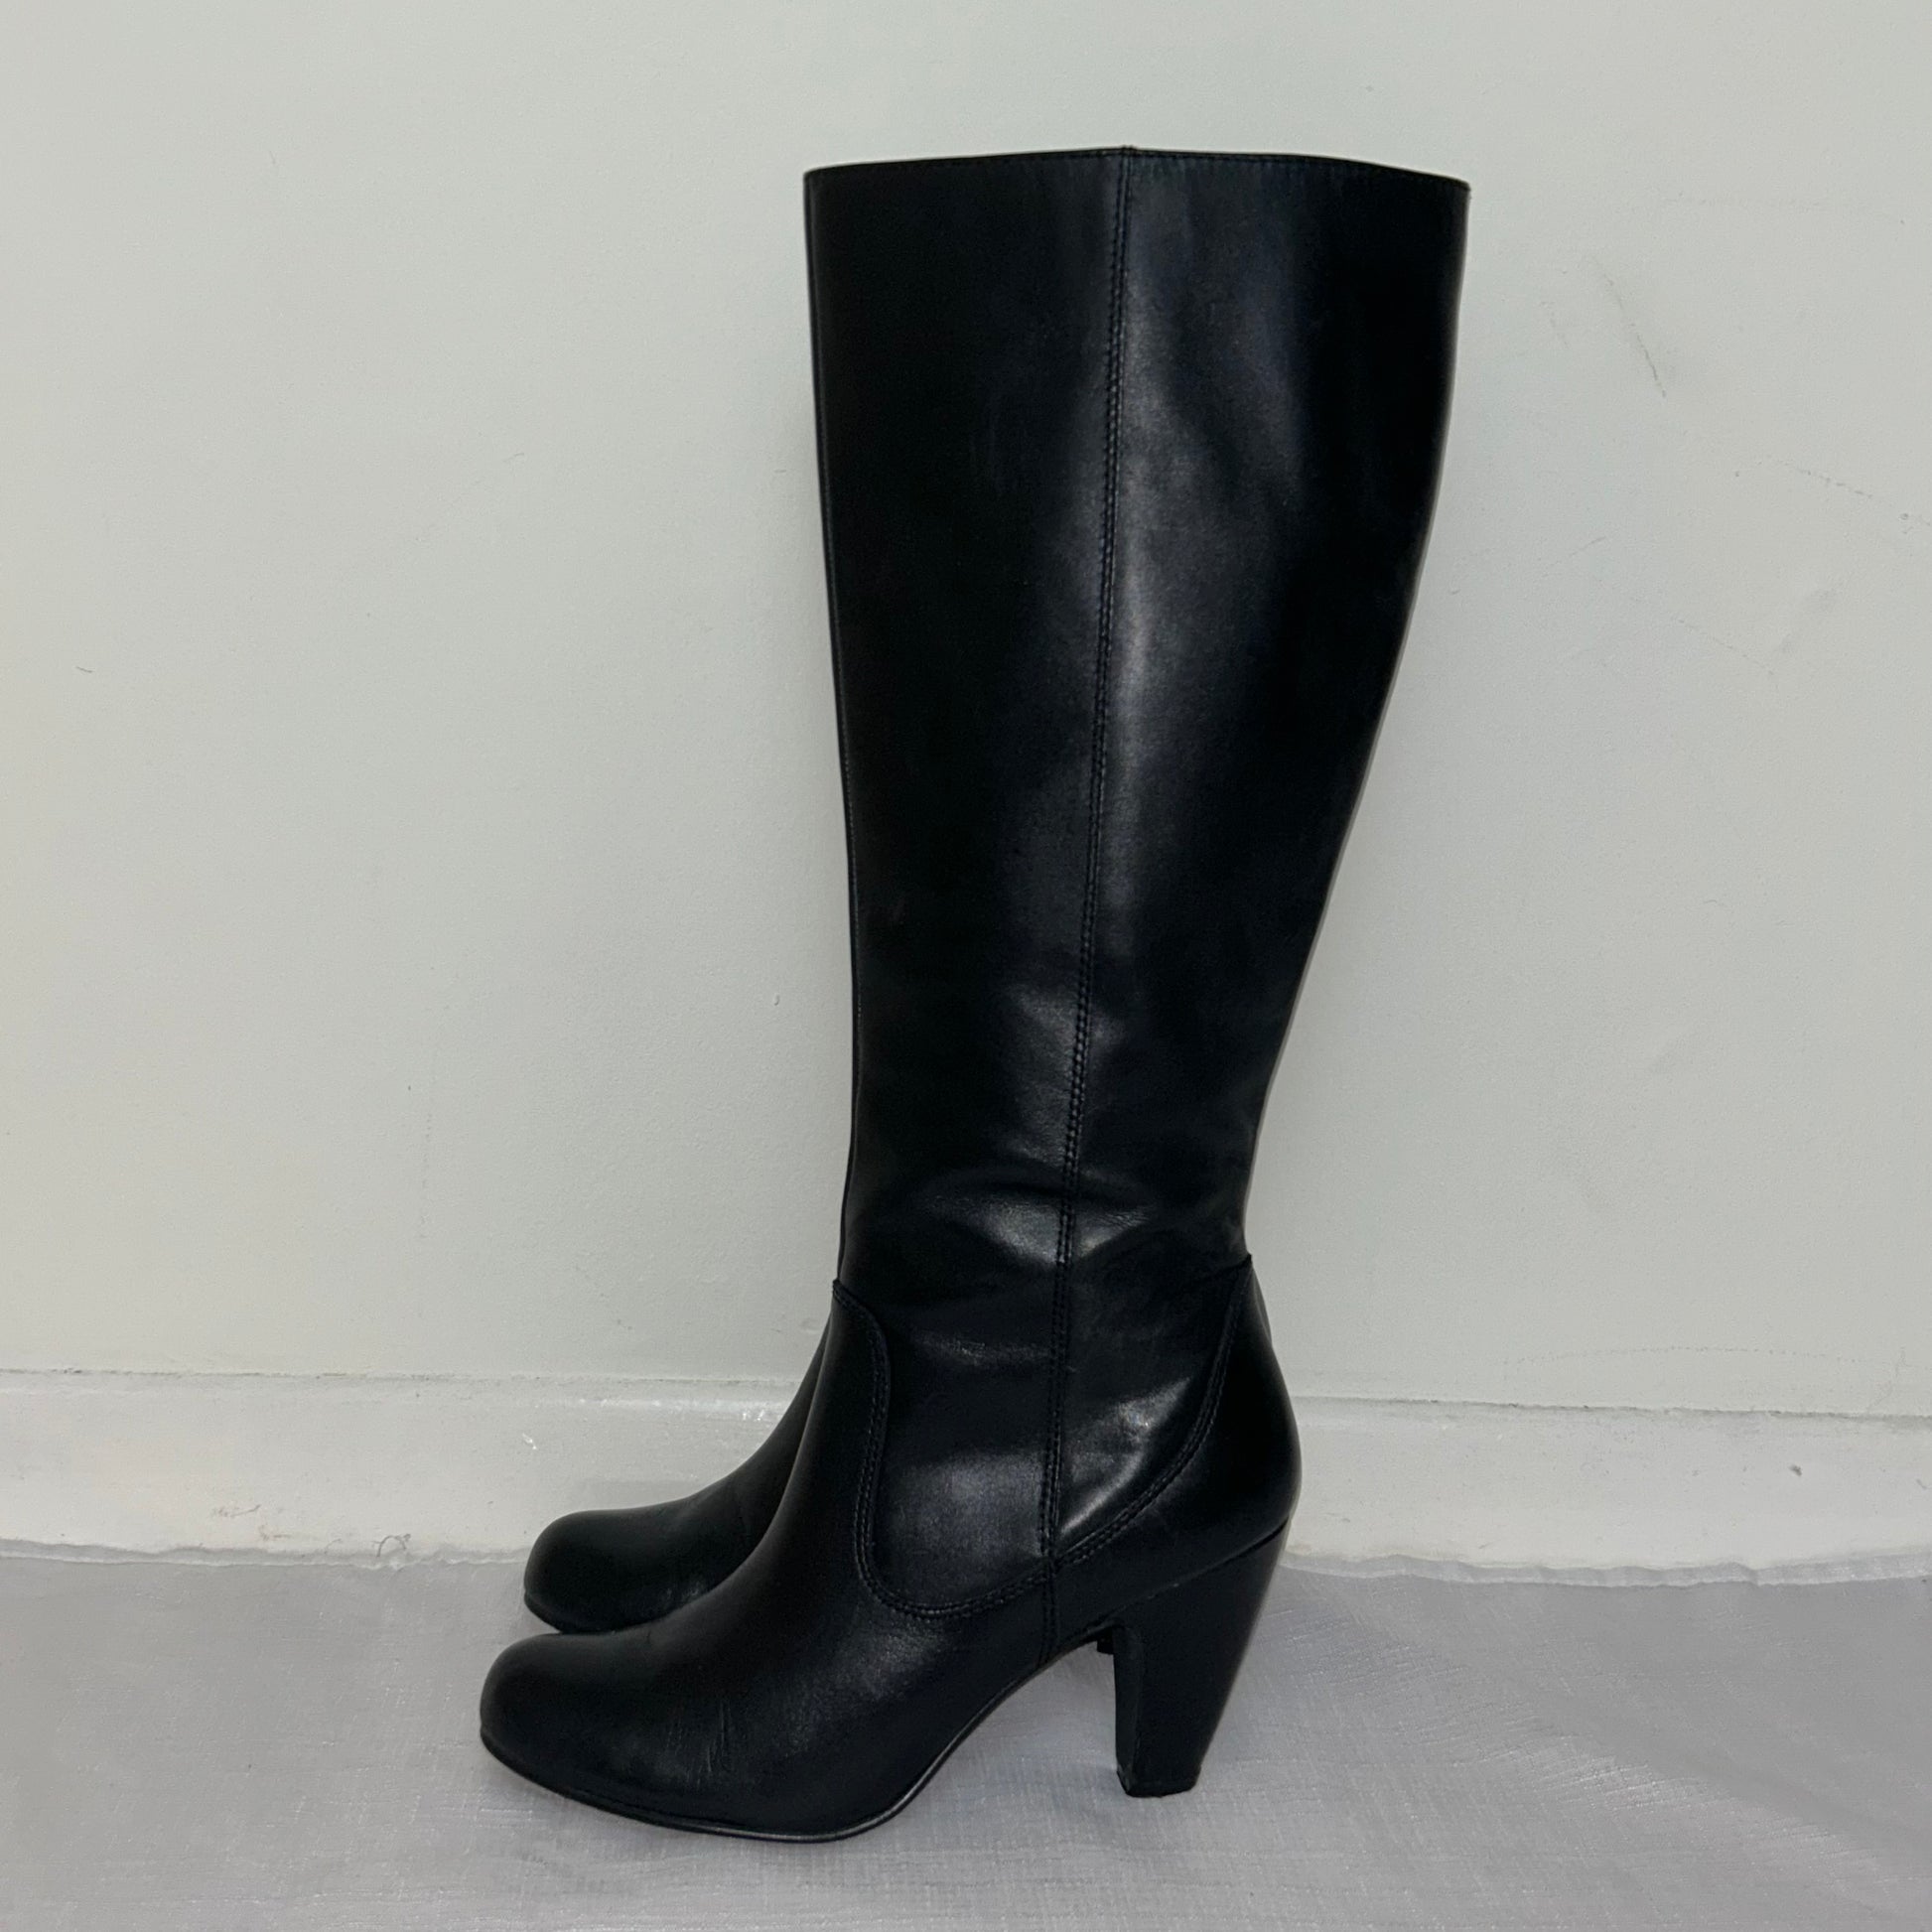 black knee high real leather boots on a white background